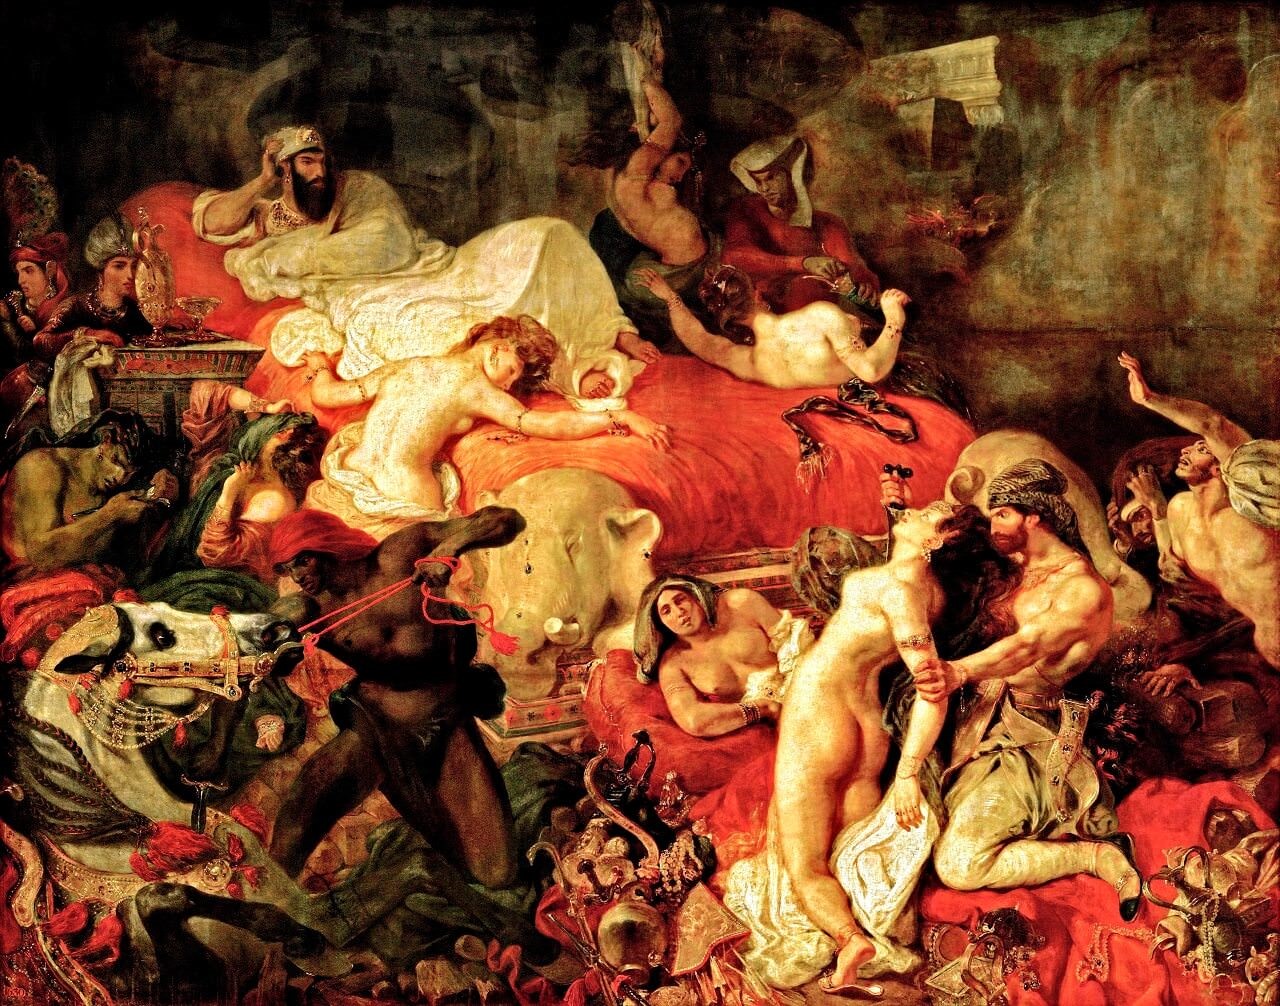 “The Death of Sardanapalus” by Eugene Delacroix